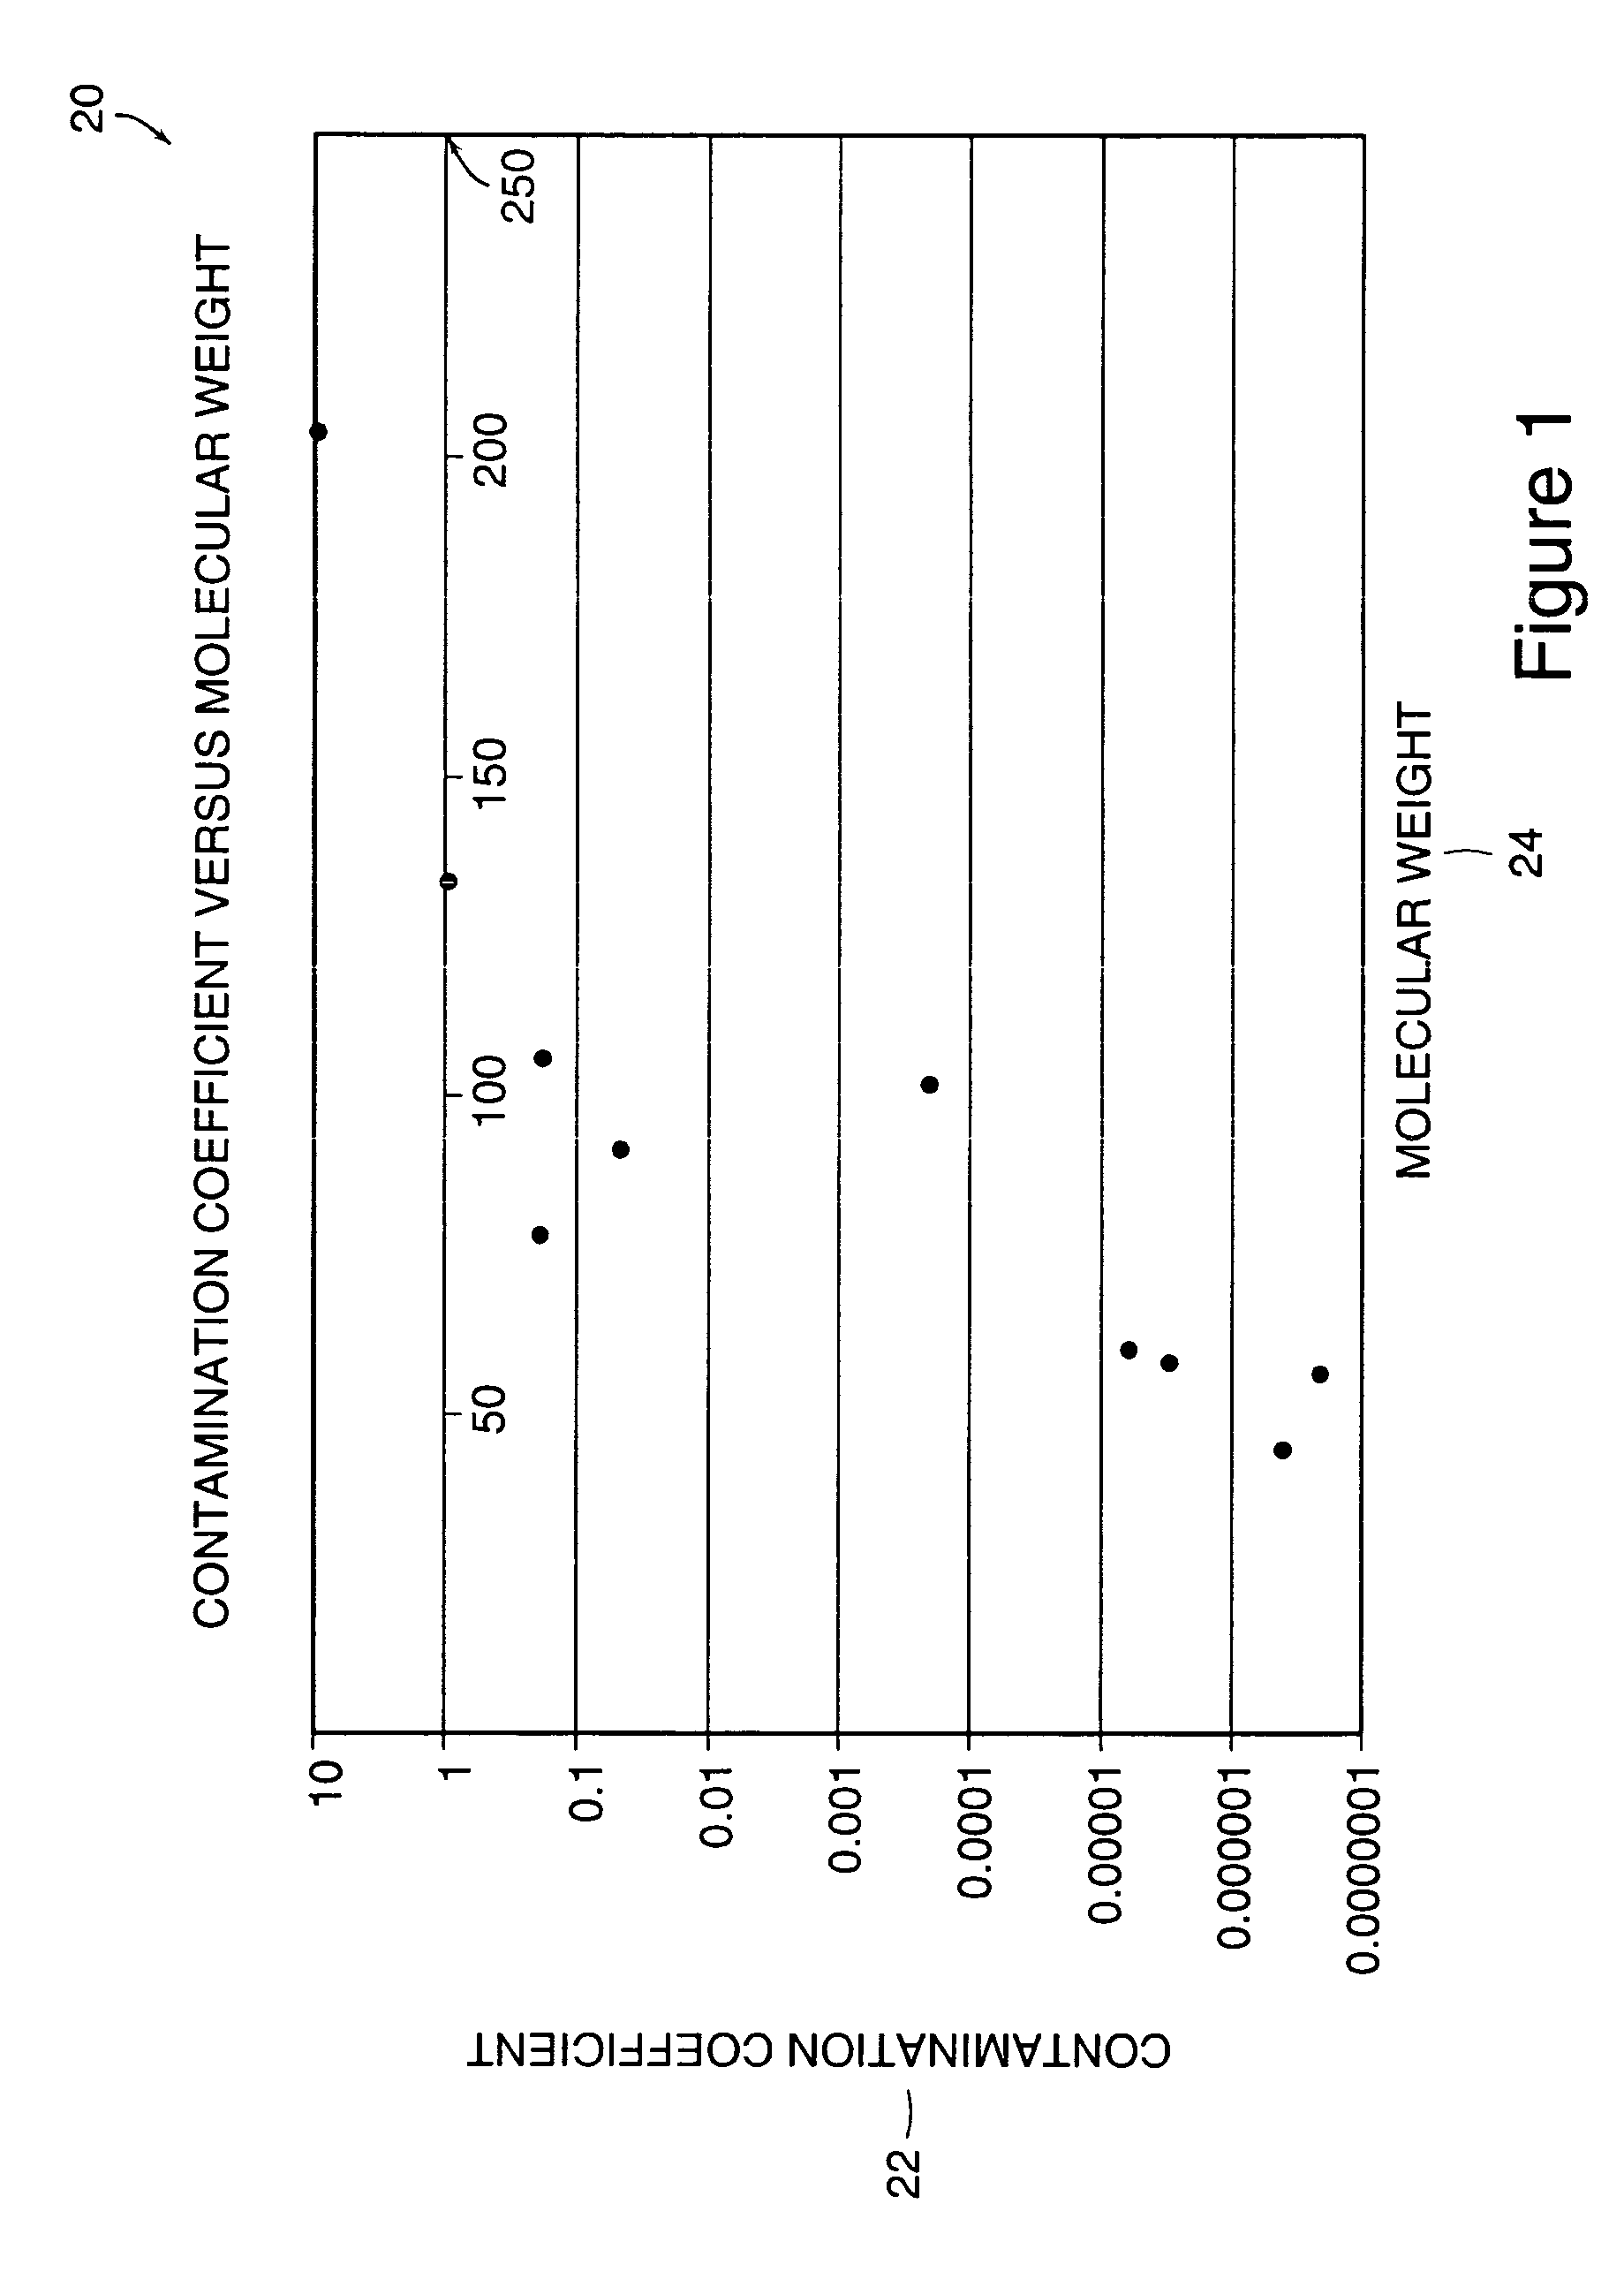 System and method for monitoring contamination